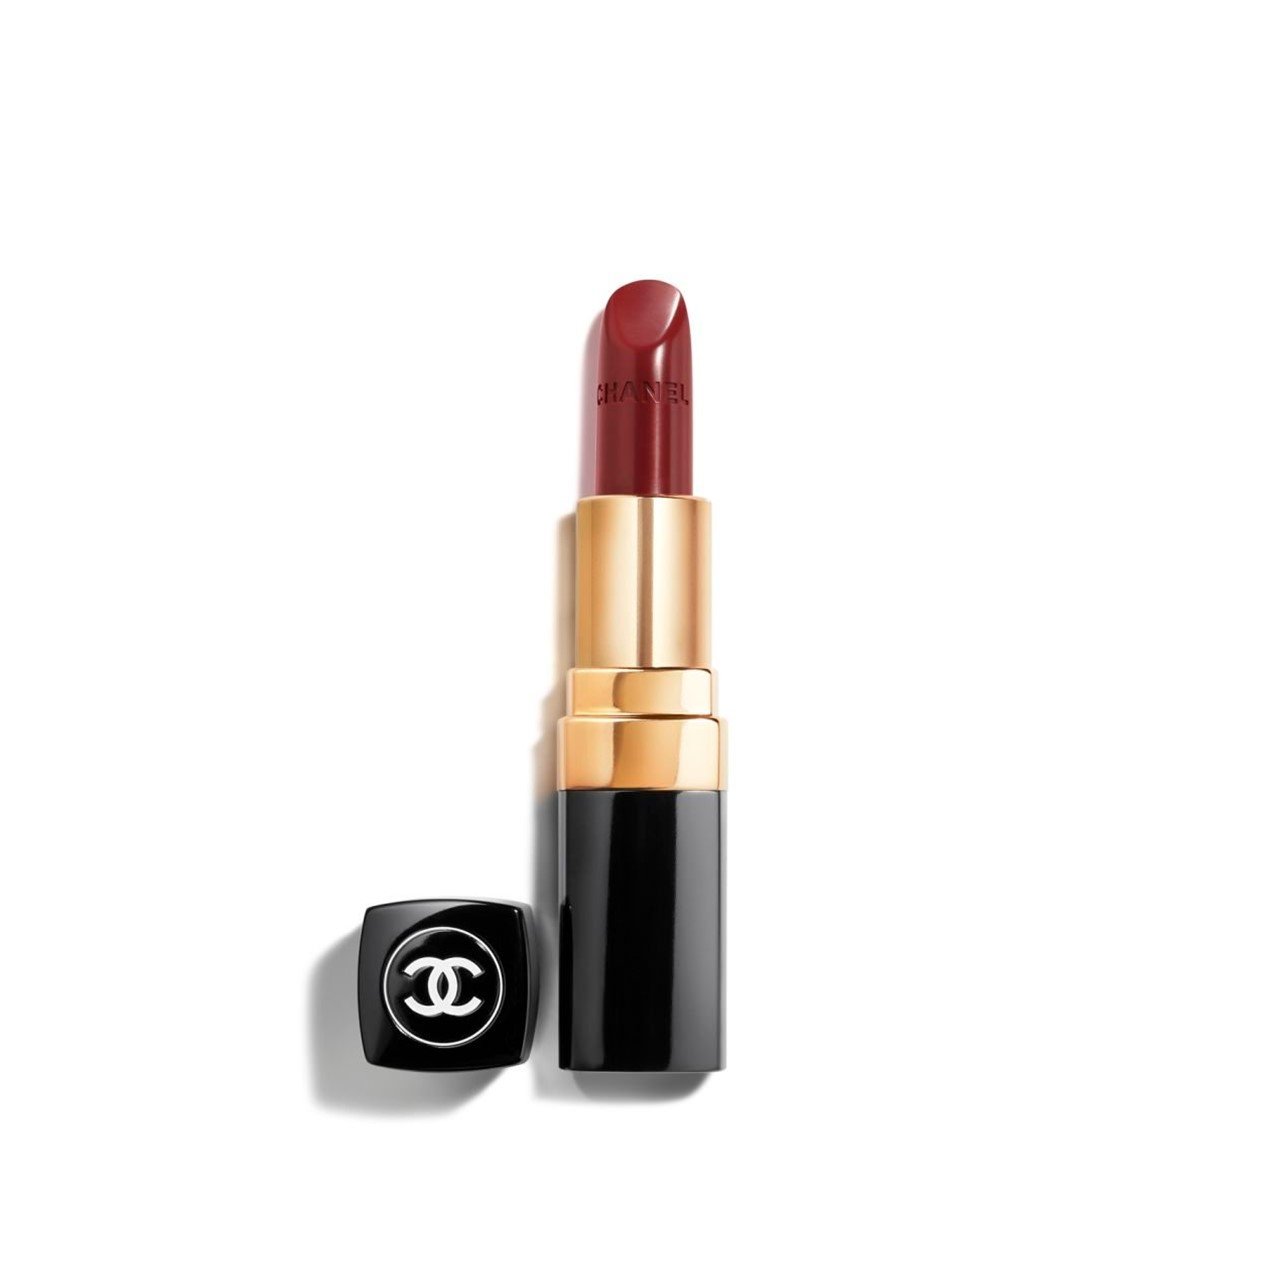 CHANEL Rouge Coco Ultra Hydrating Lip Colour 470 3.5g (0.12oz)